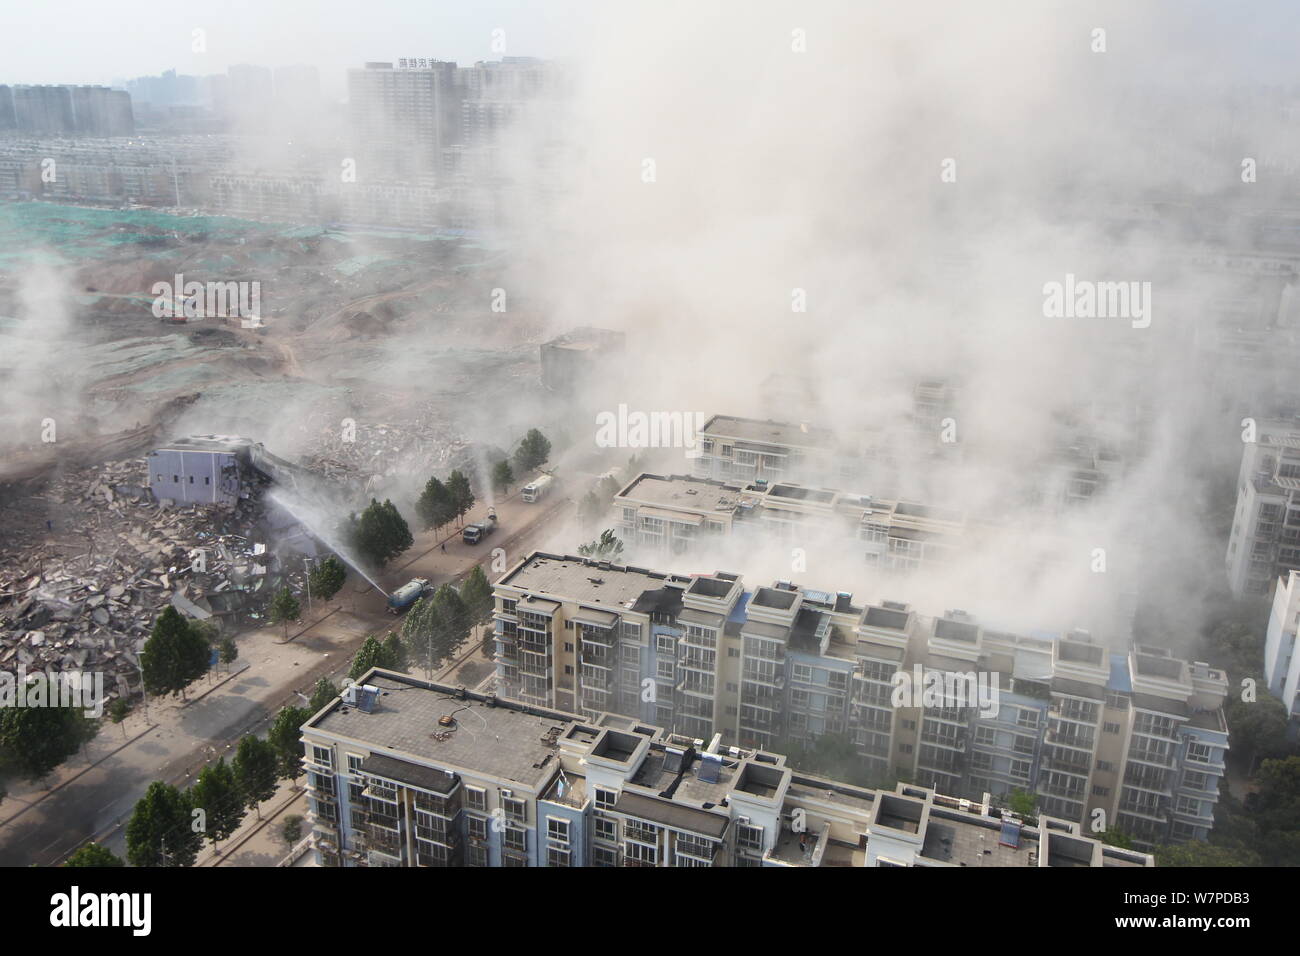 Trucks equipped with water cannons are set up to lower dense smoke after six buildings ranging from 7 to 12 storeys high and covering 20,000 square me Stock Photo